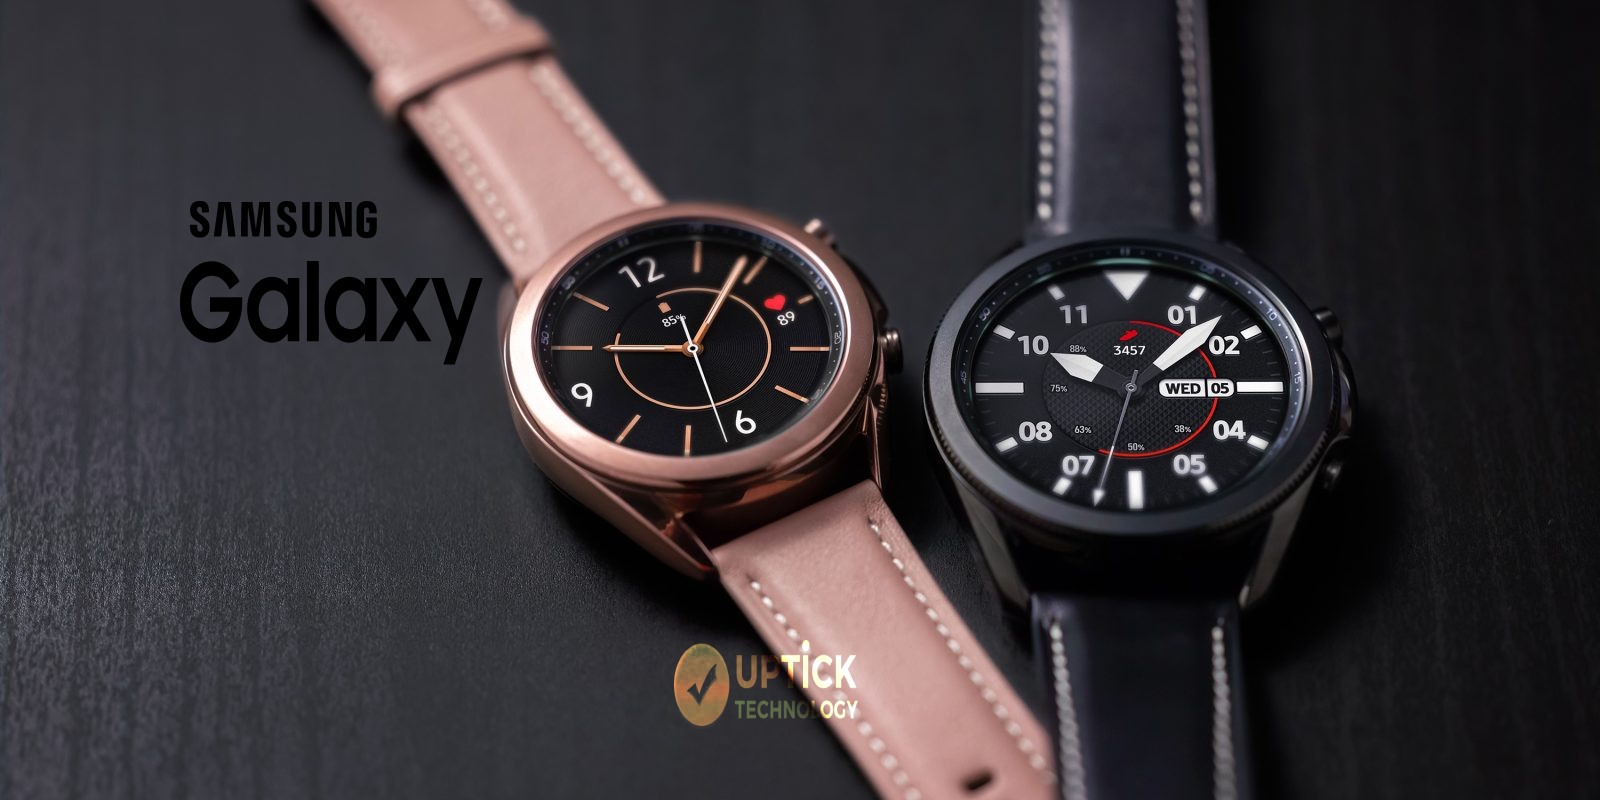 Samsung Launches Galaxy Watch 3, Galaxy Buds: Features and Price